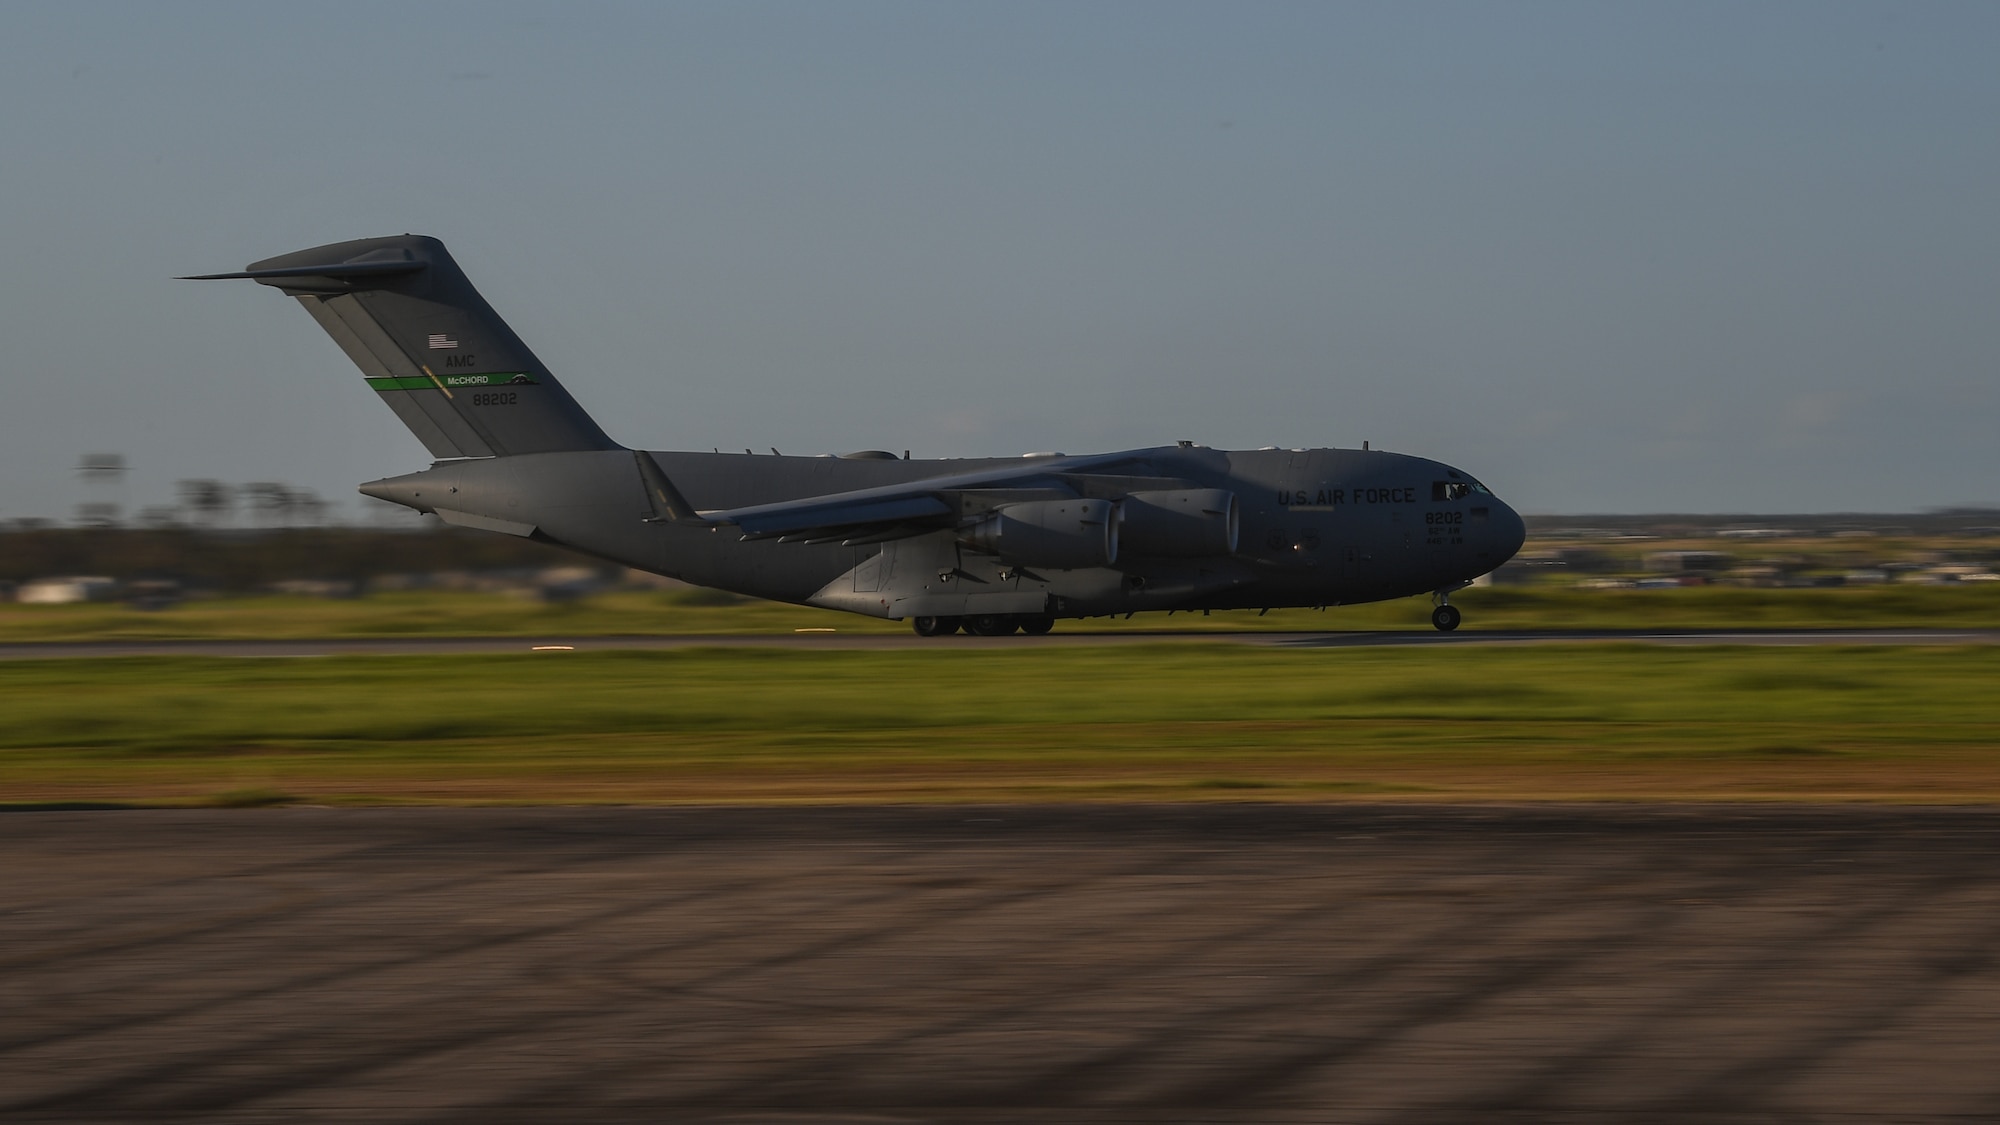 A C-17 Globemaster III departs Beira Airport, Mozambique, April 2, 2019, after delivering relief supplies, equipment and personnel supporting Combined Joint Task Force-Horn of Africa (CJTF-HOA) for the U.S. Department of Defense’s (DoD) relief effort in the Republic of Mozambique and surrounding areas following Cyclone Idai. Teams from CJTF-HOA, which is leading DoD support to relief efforts in Mozambique, began immediate preparation to respond following a call for assistance from the U.S. Agency for International Development’s Disaster Assistance Response Team. (U.S. Air Force photo by Staff Sgt. Corban Lundborg)